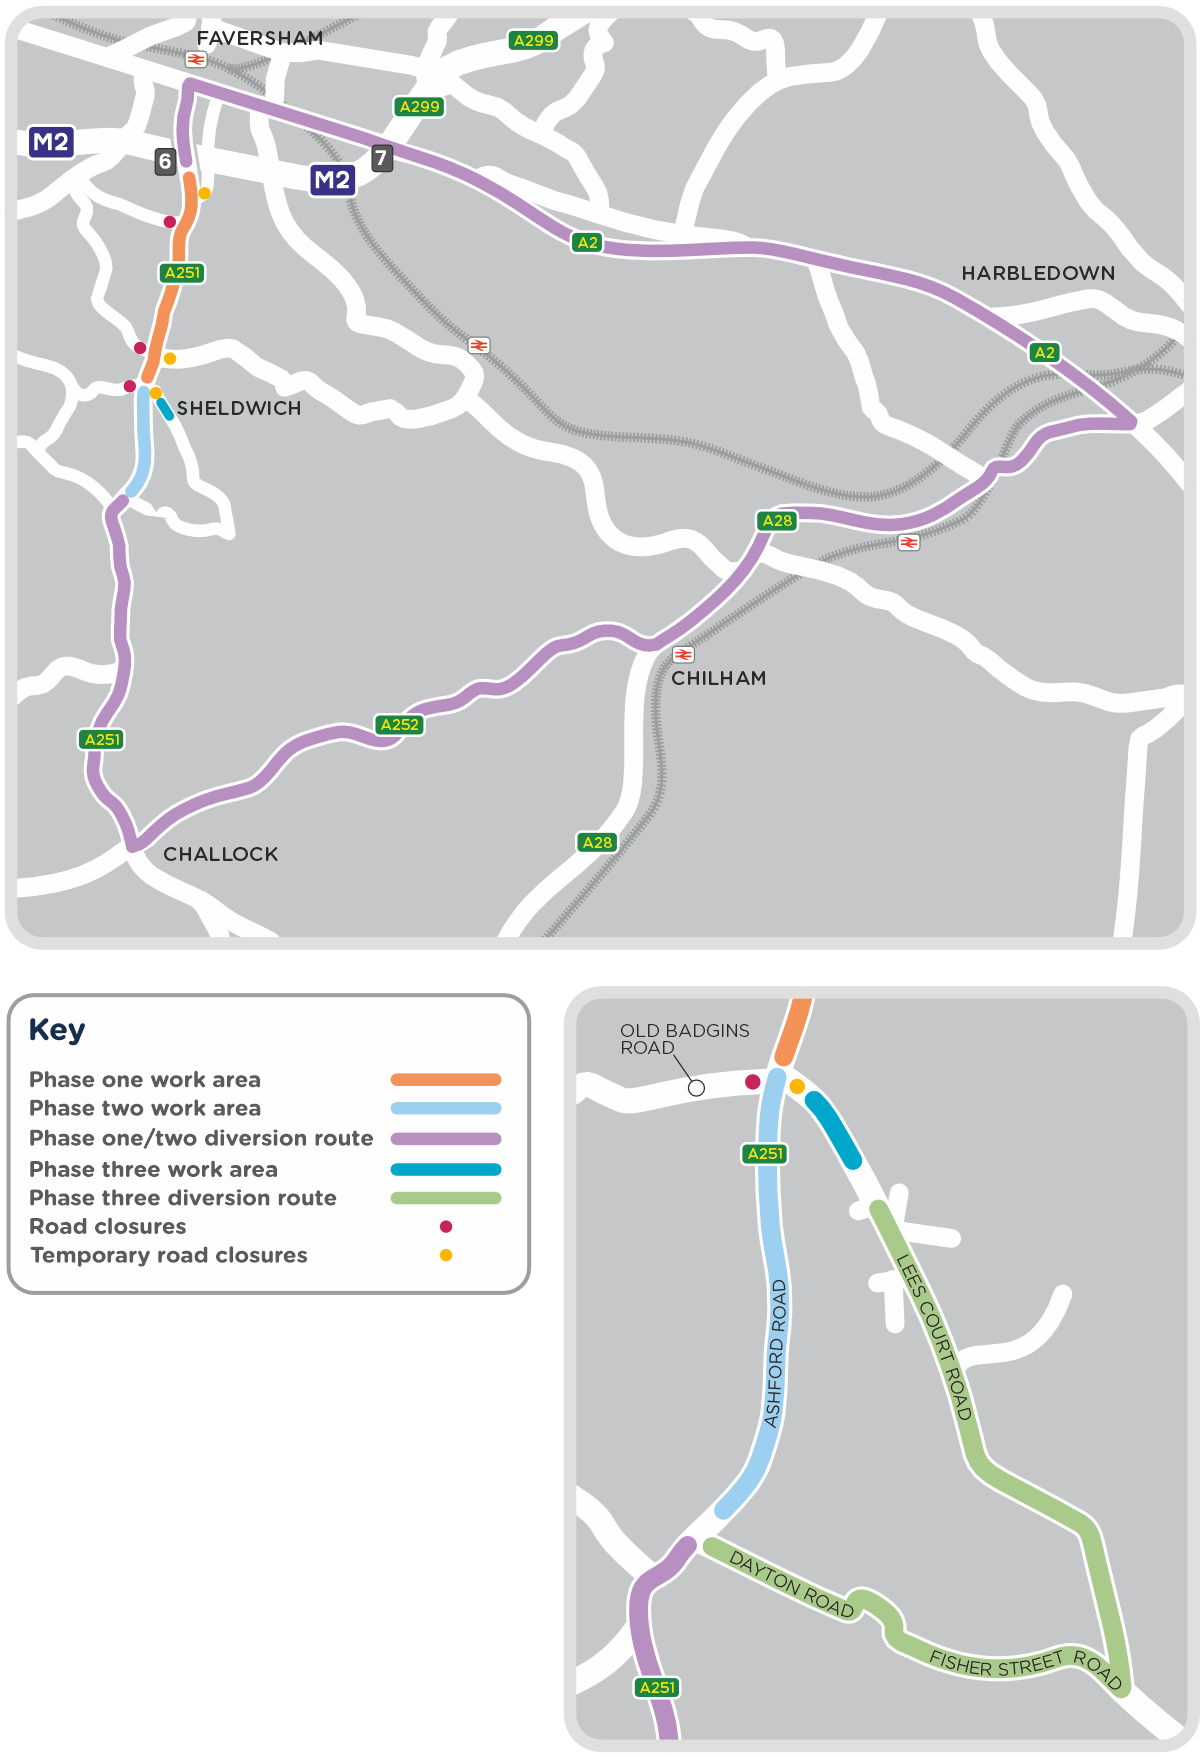 Map displaying the closure areas and diversion routes for the work taking place in Faversham